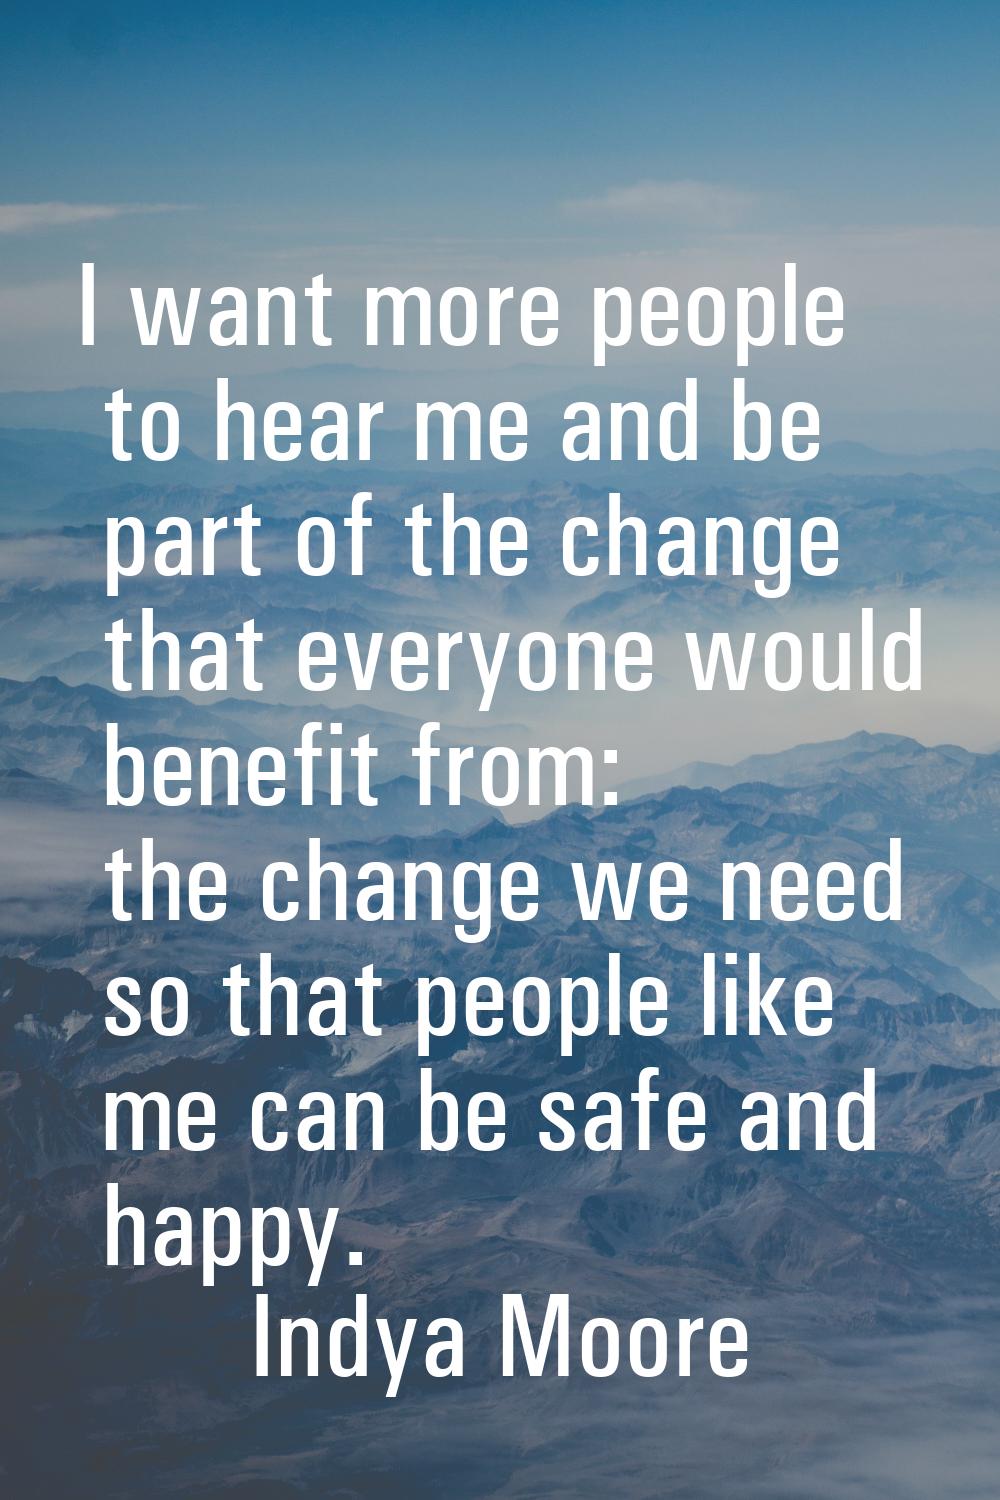 I want more people to hear me and be part of the change that everyone would benefit from: the chang